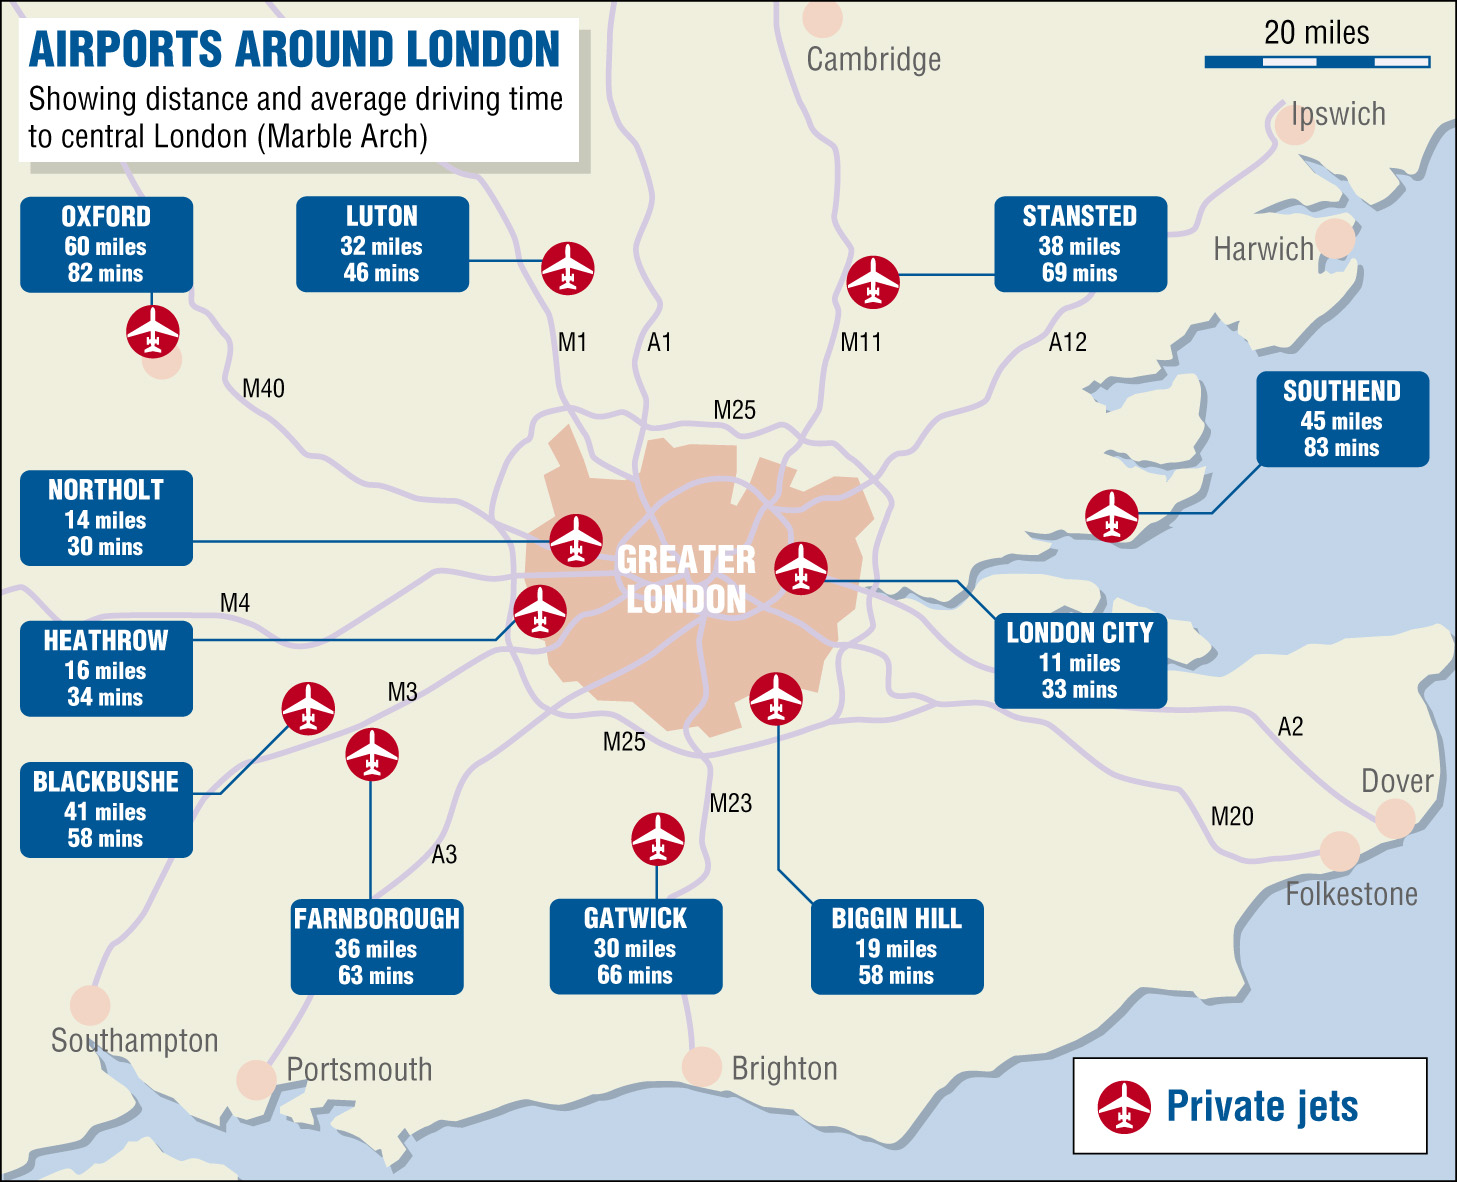 Map Of London Showing Airports - United States Map